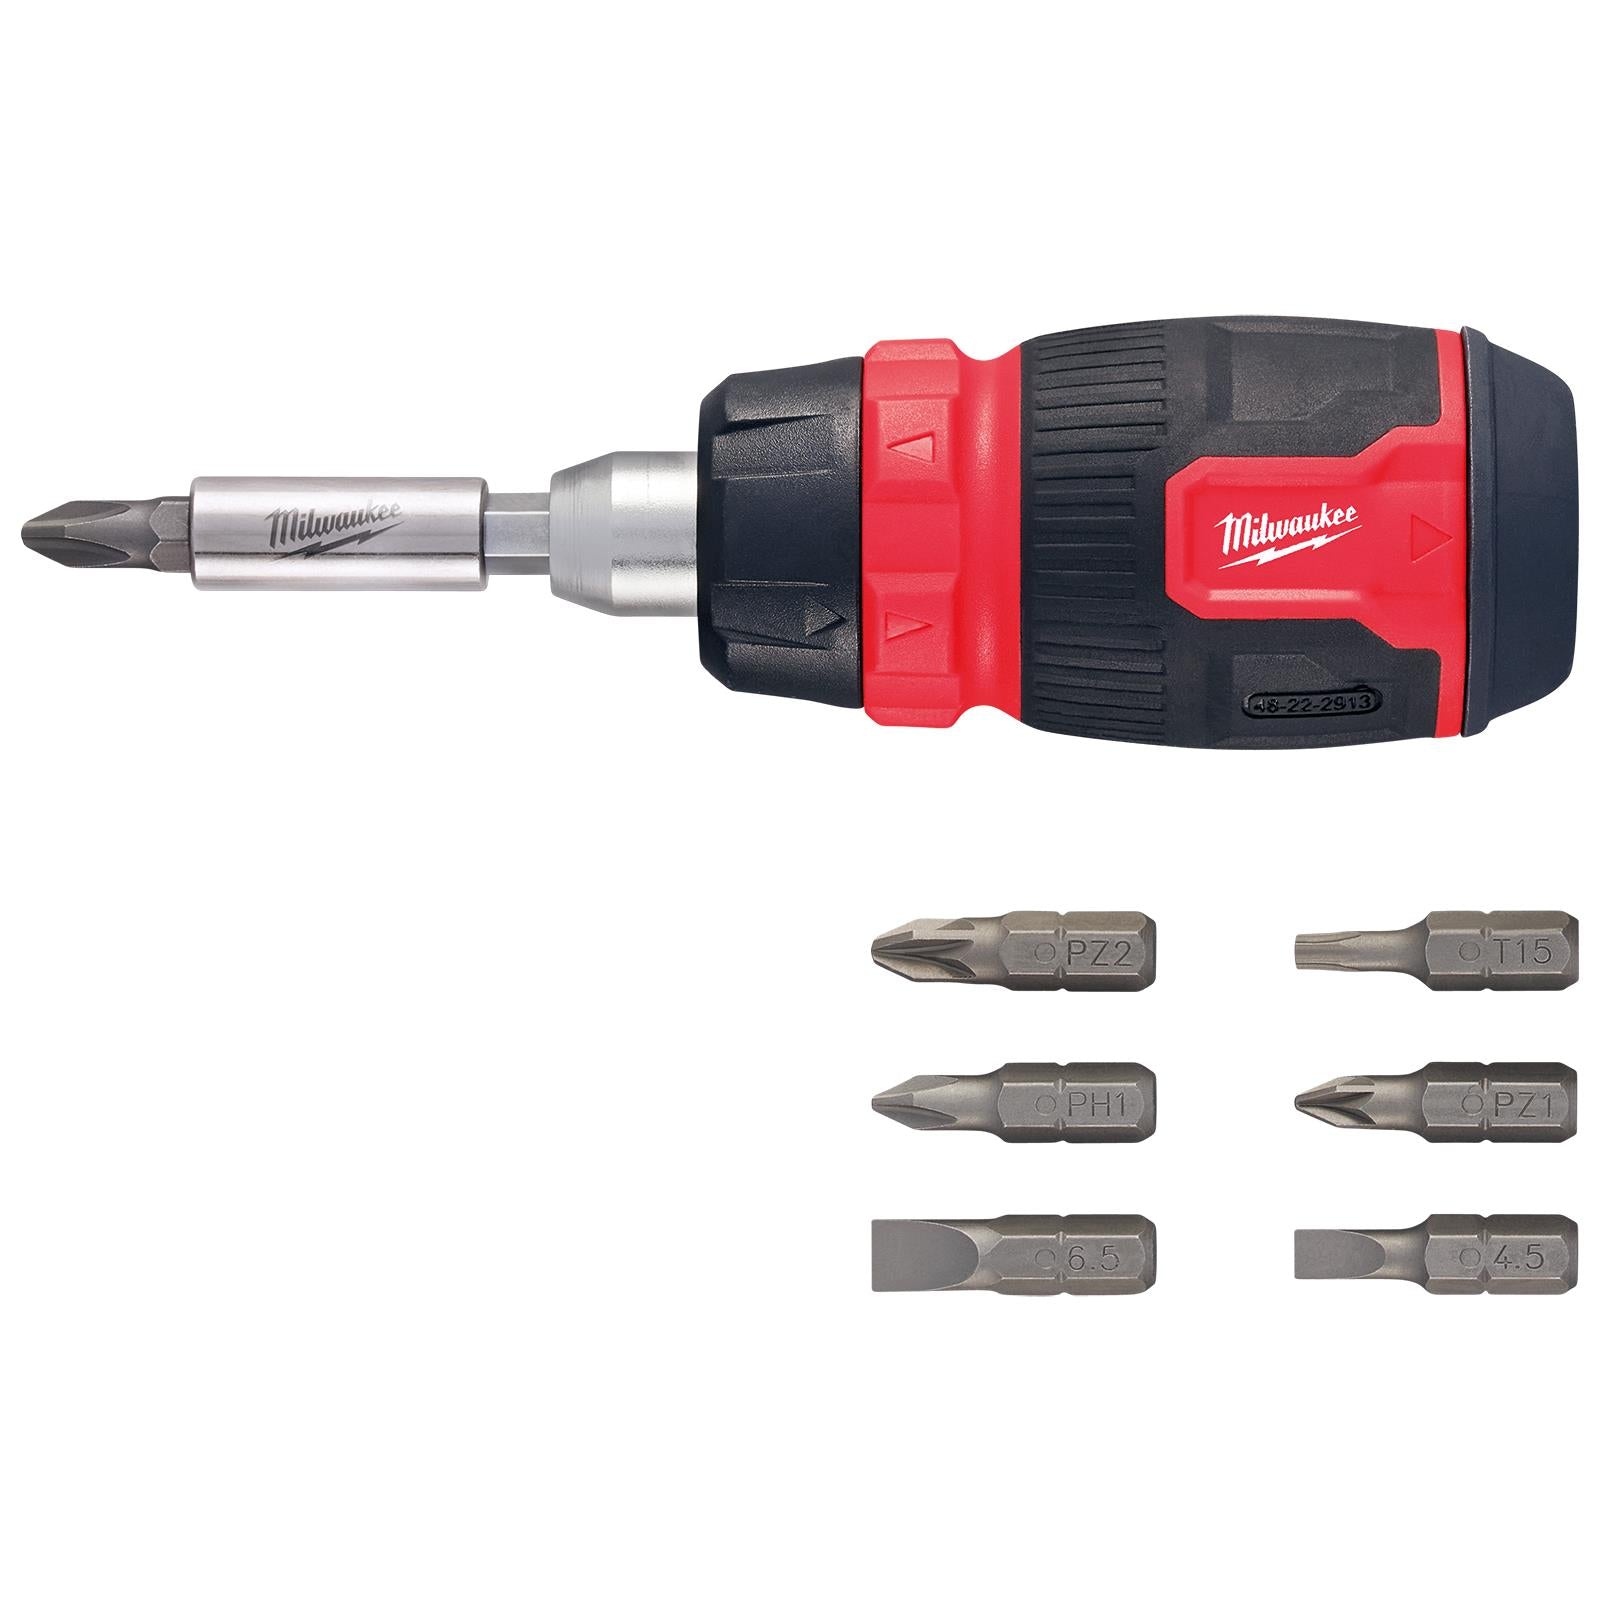 Milwaukee Ratchet Screwdriver Set Compact 8 in 1 Multi Bit Stubby Pozi Phillips Torx Slotted